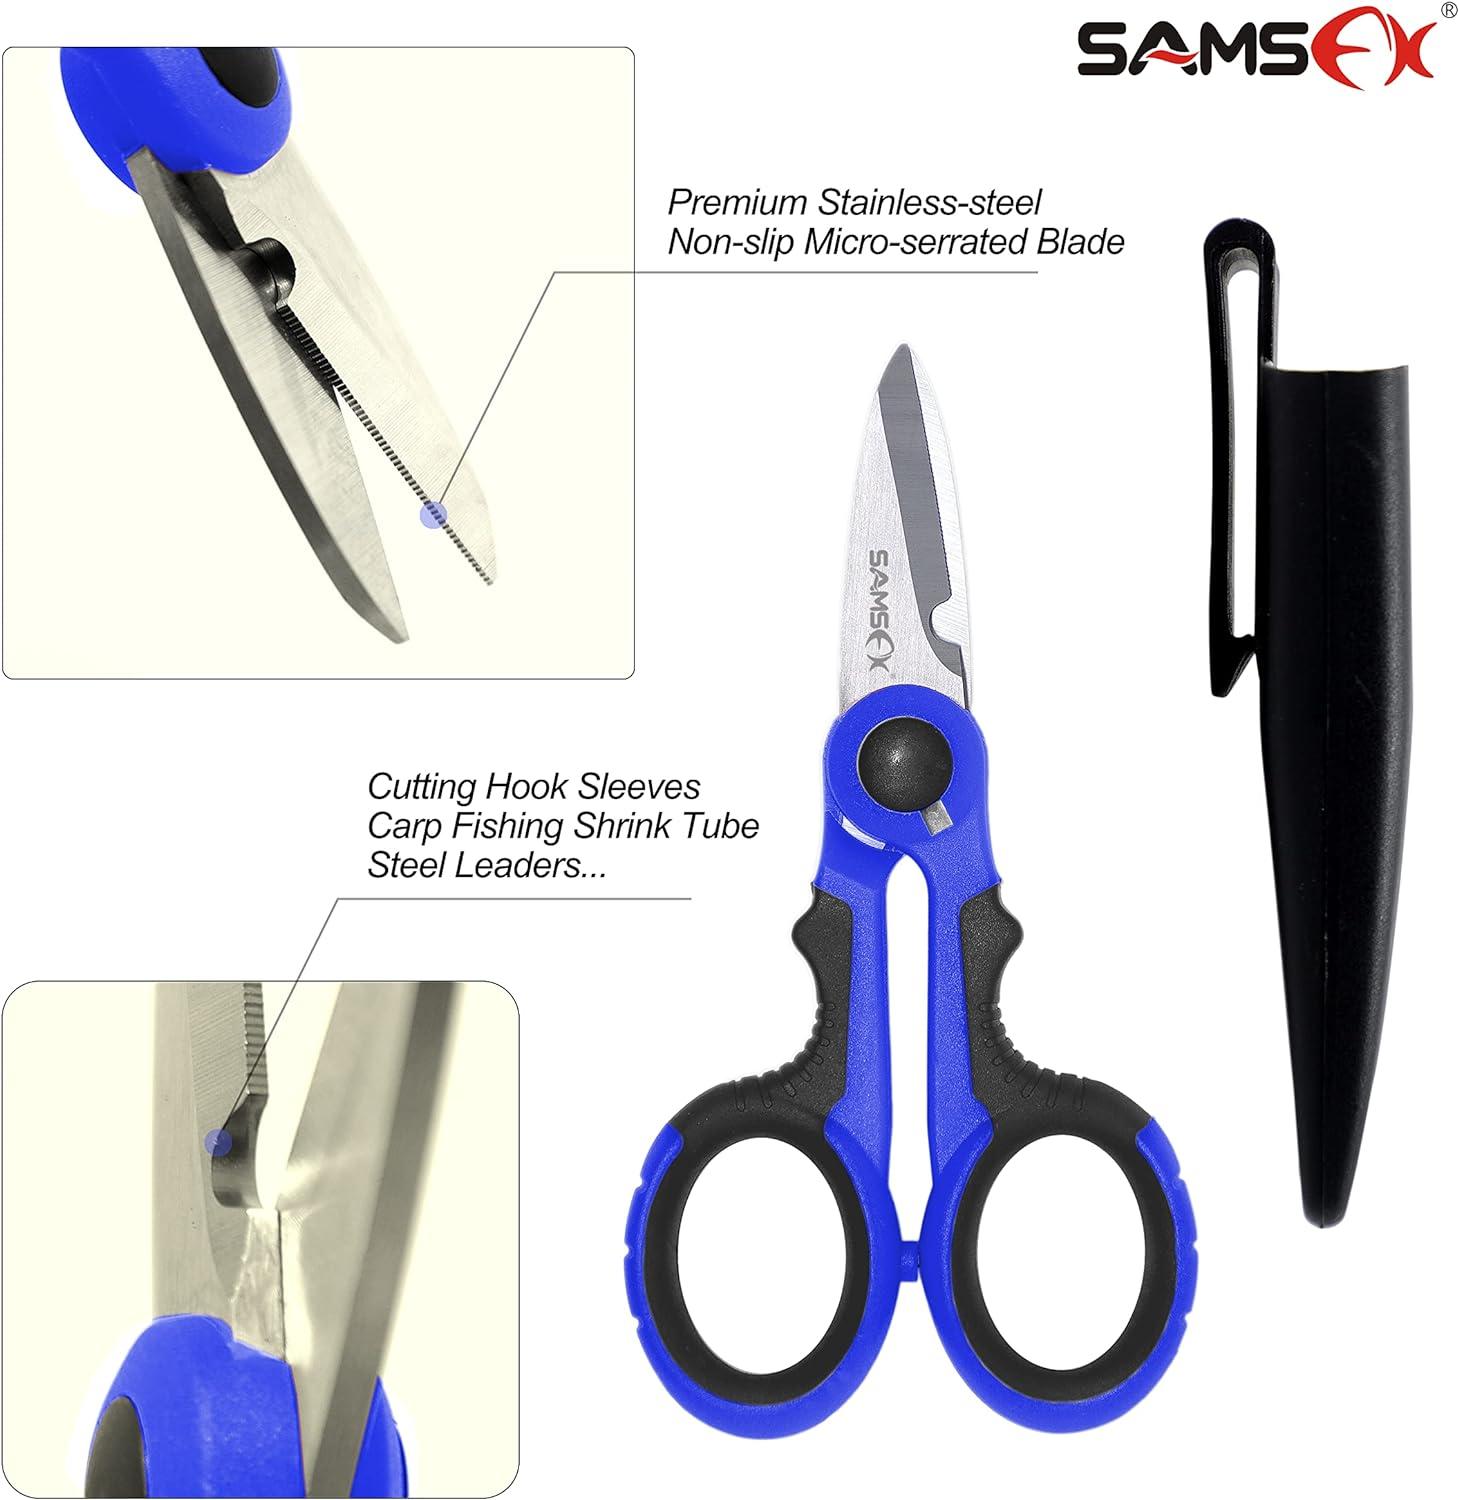 SAMSFX 6.5 Pro Fishing Shears Dual Serrated Blades, Fishing Braided Line  Scissors with Titanium Coating, Non-Slip Grip & Multifunction Tool,  Includes